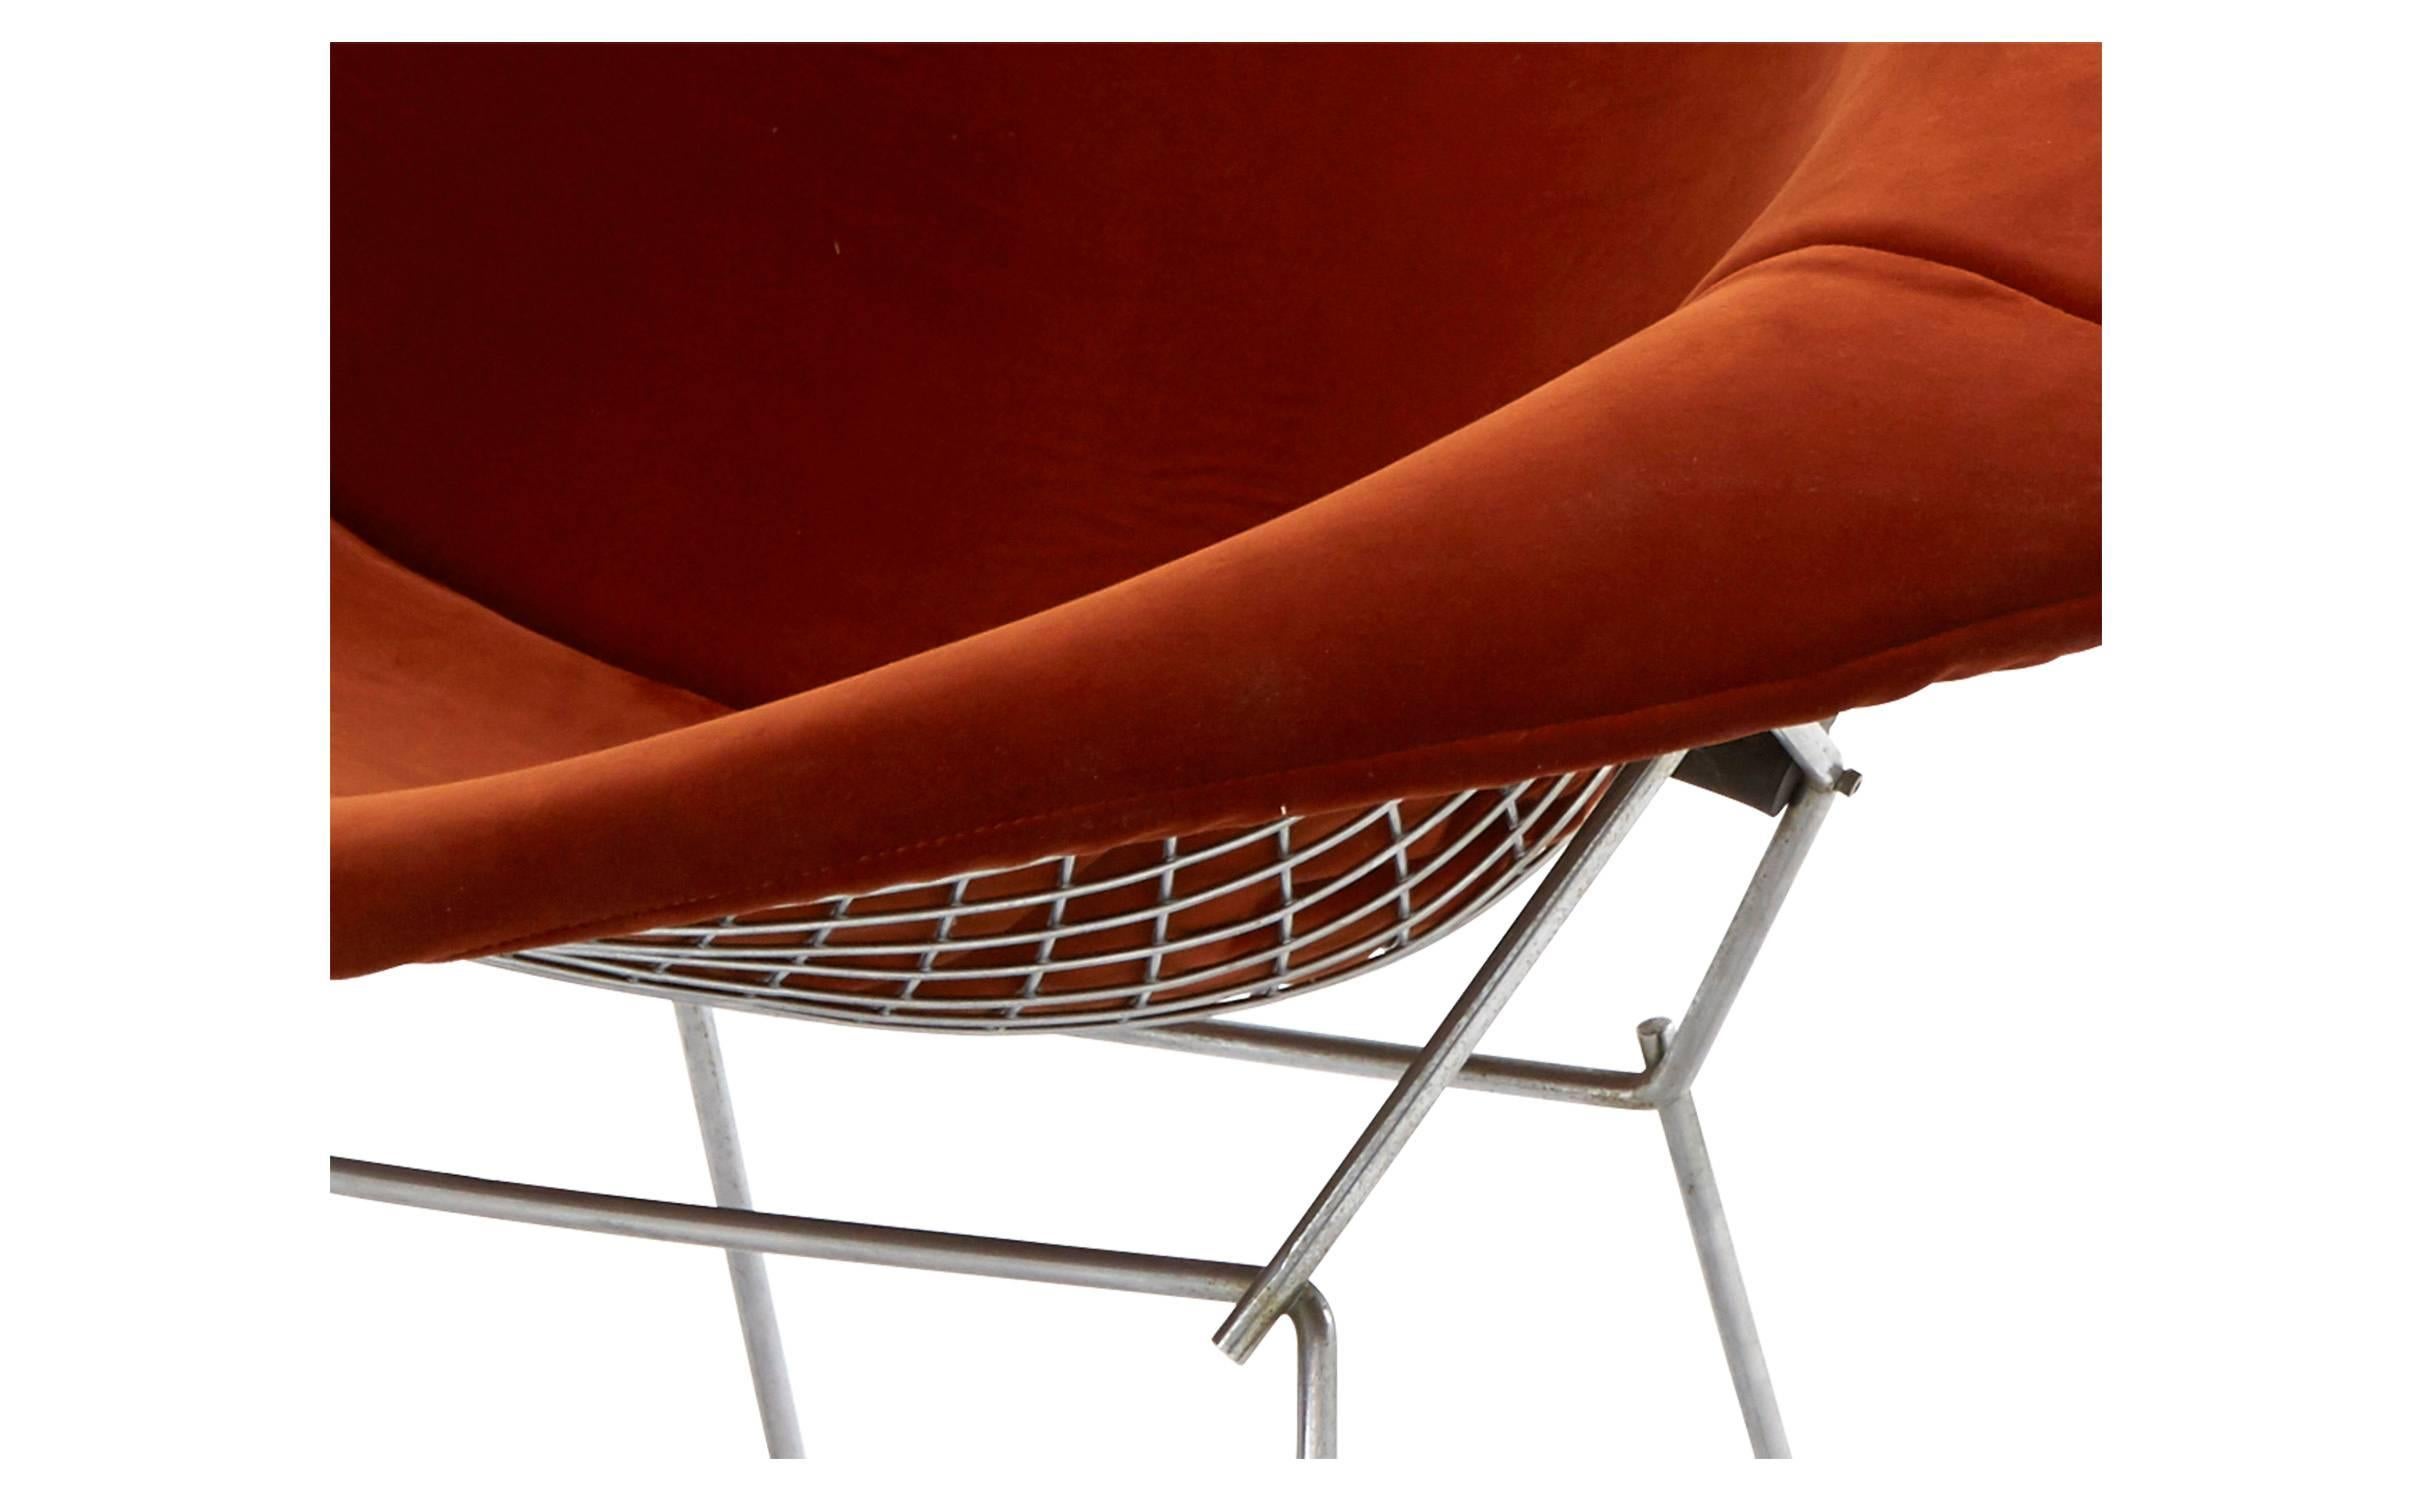 • Designed by Harry Bertoia for the Knoll Company
• Stainless steel frame reupholstered in rust velvet
• 20th century, American

Dimensions:
• Overall: 31